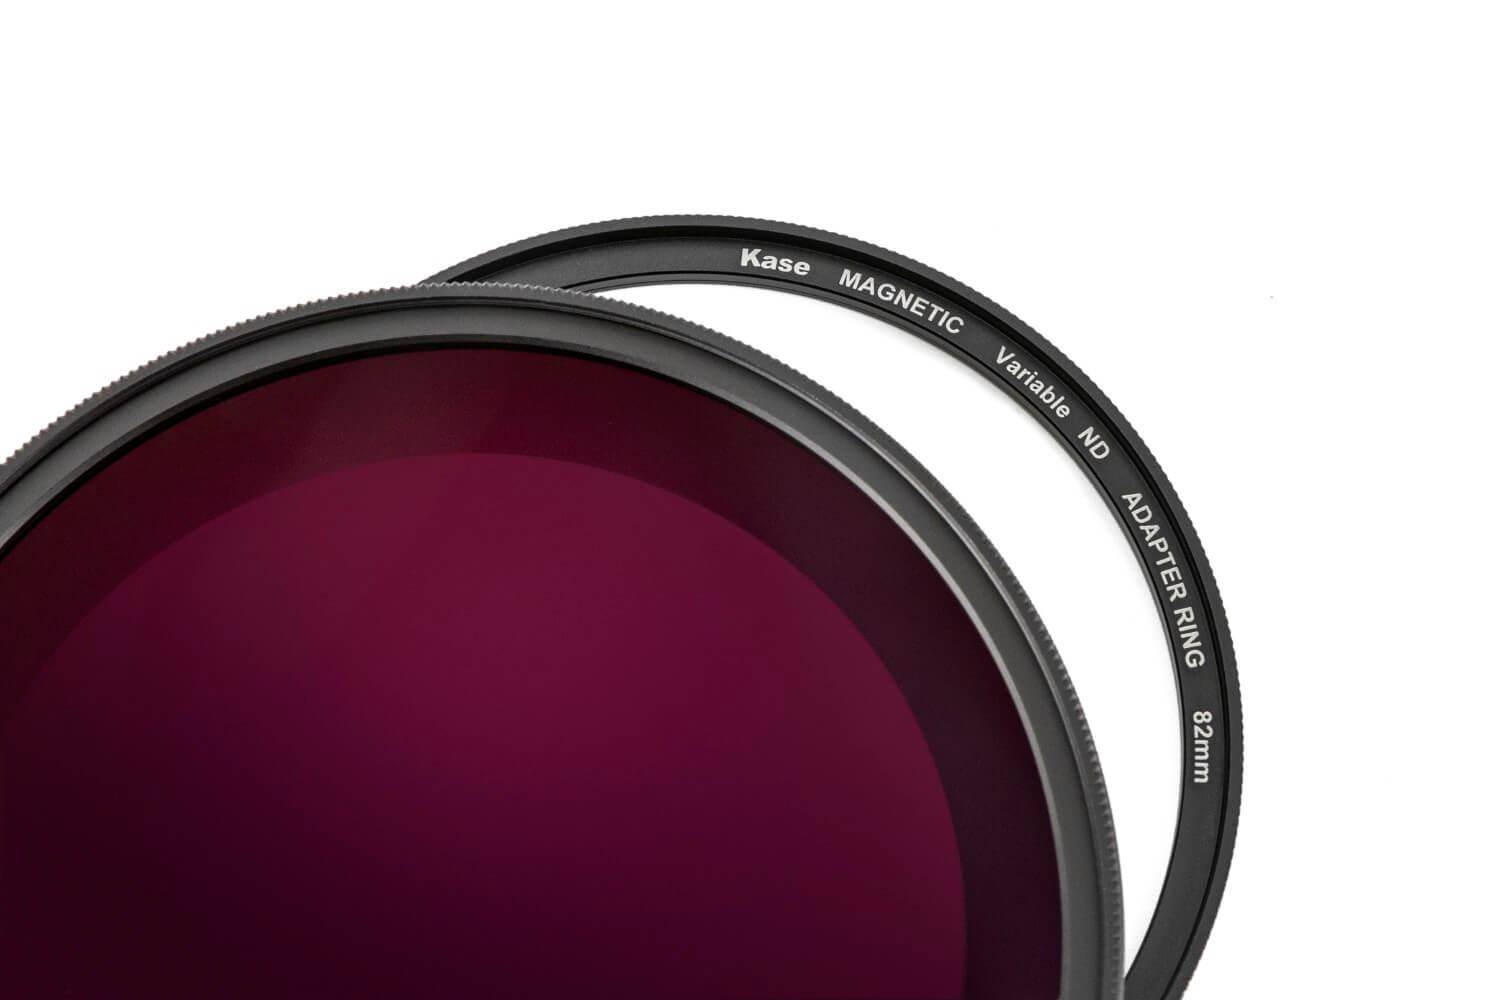 ROUND Magnetic Variable ND Filter 6-9 Stops